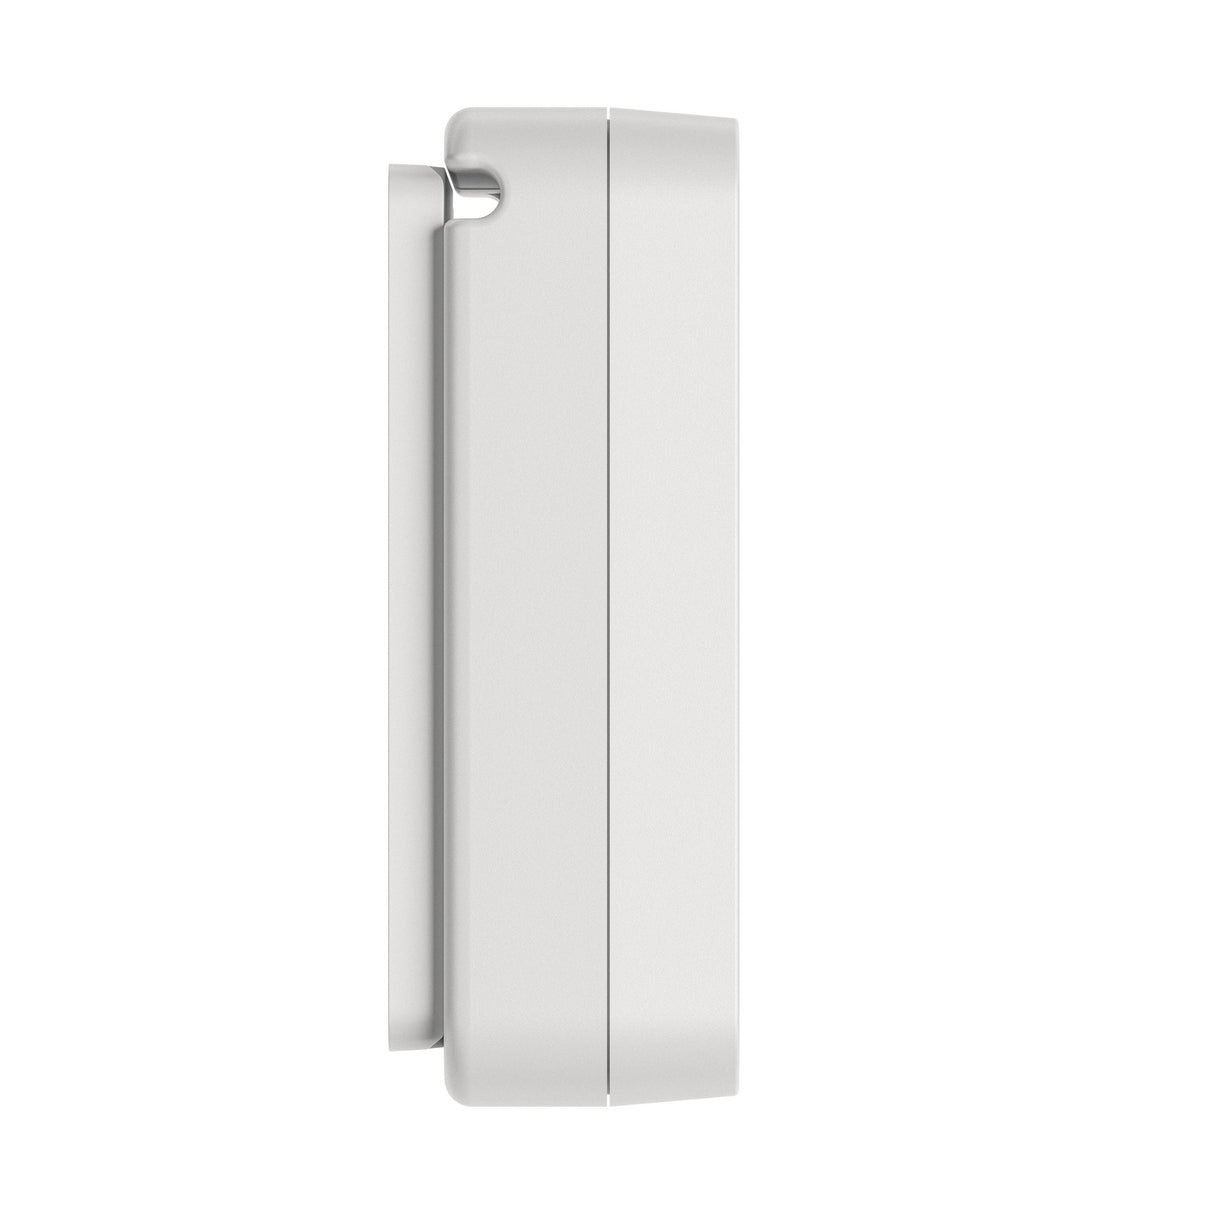 Sennheiser AWM UHF II Active Directional Antenna for Evolution Wireless Systems, 823-1075 MHz